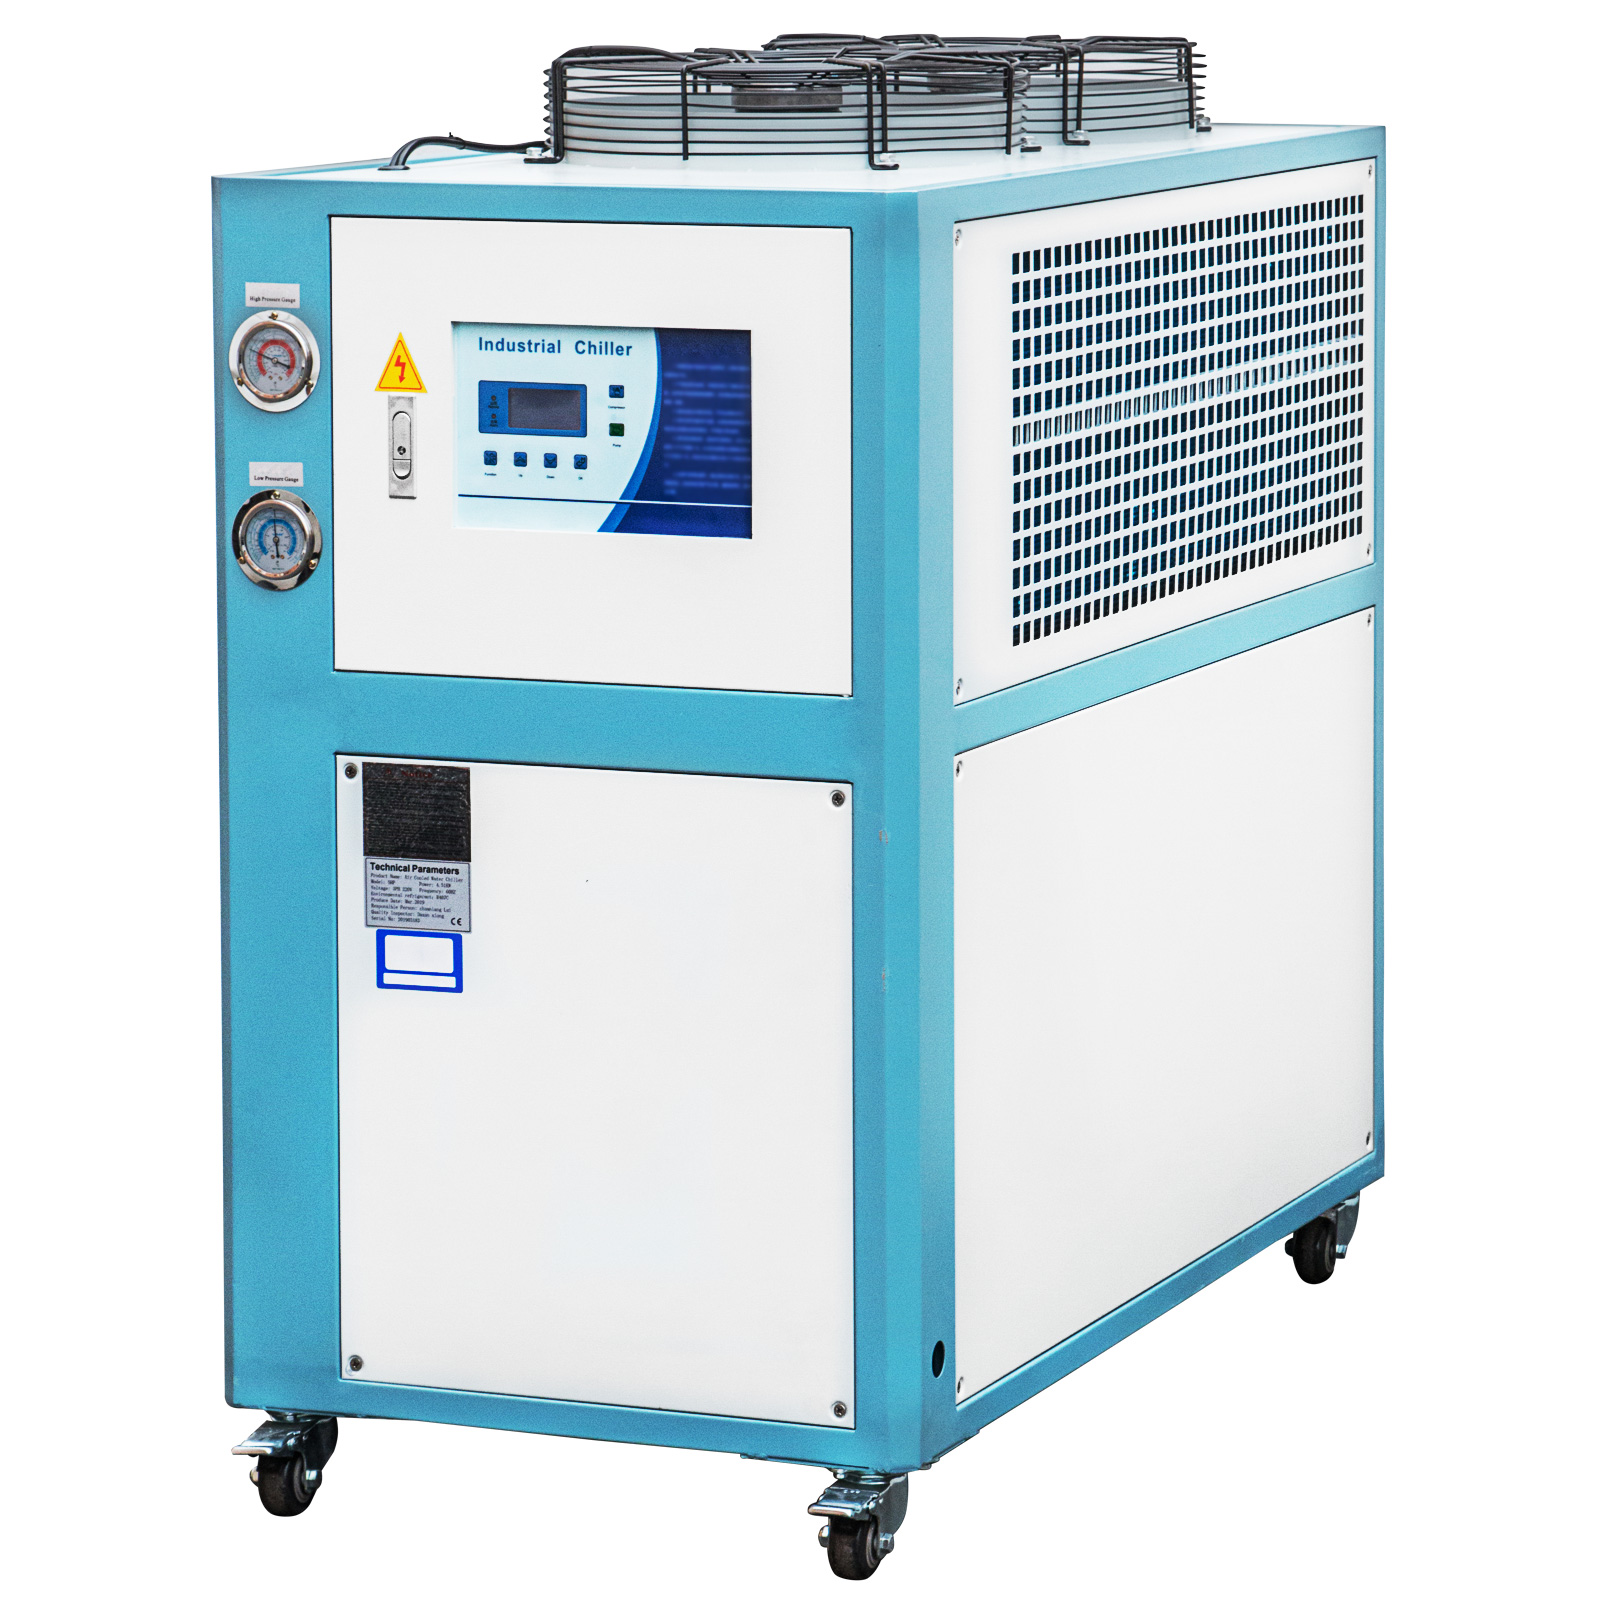 3 Ton Air-cooled Industrial Chiller 9kw Lcd Display Panasonic Compressor 220v от Vevor Many GEOs